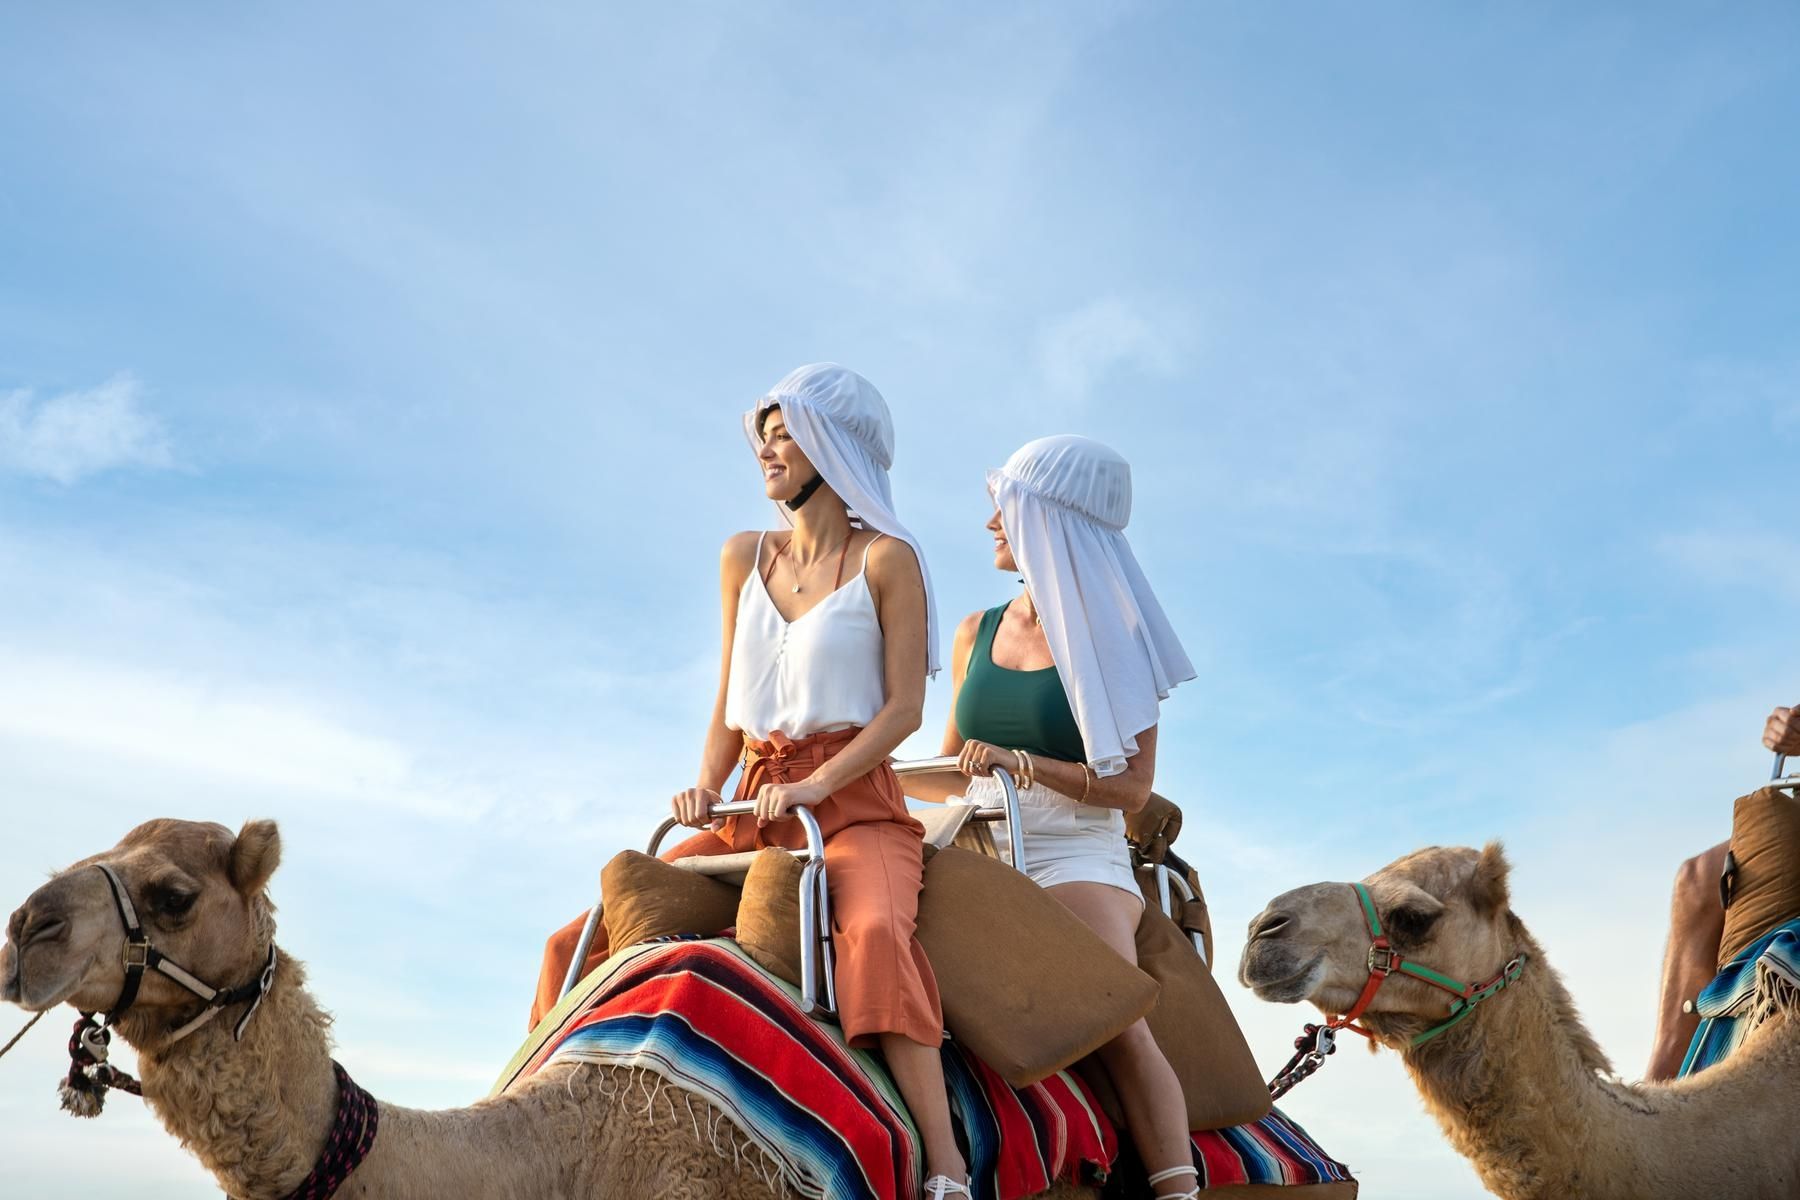 Outback camel ride excursion